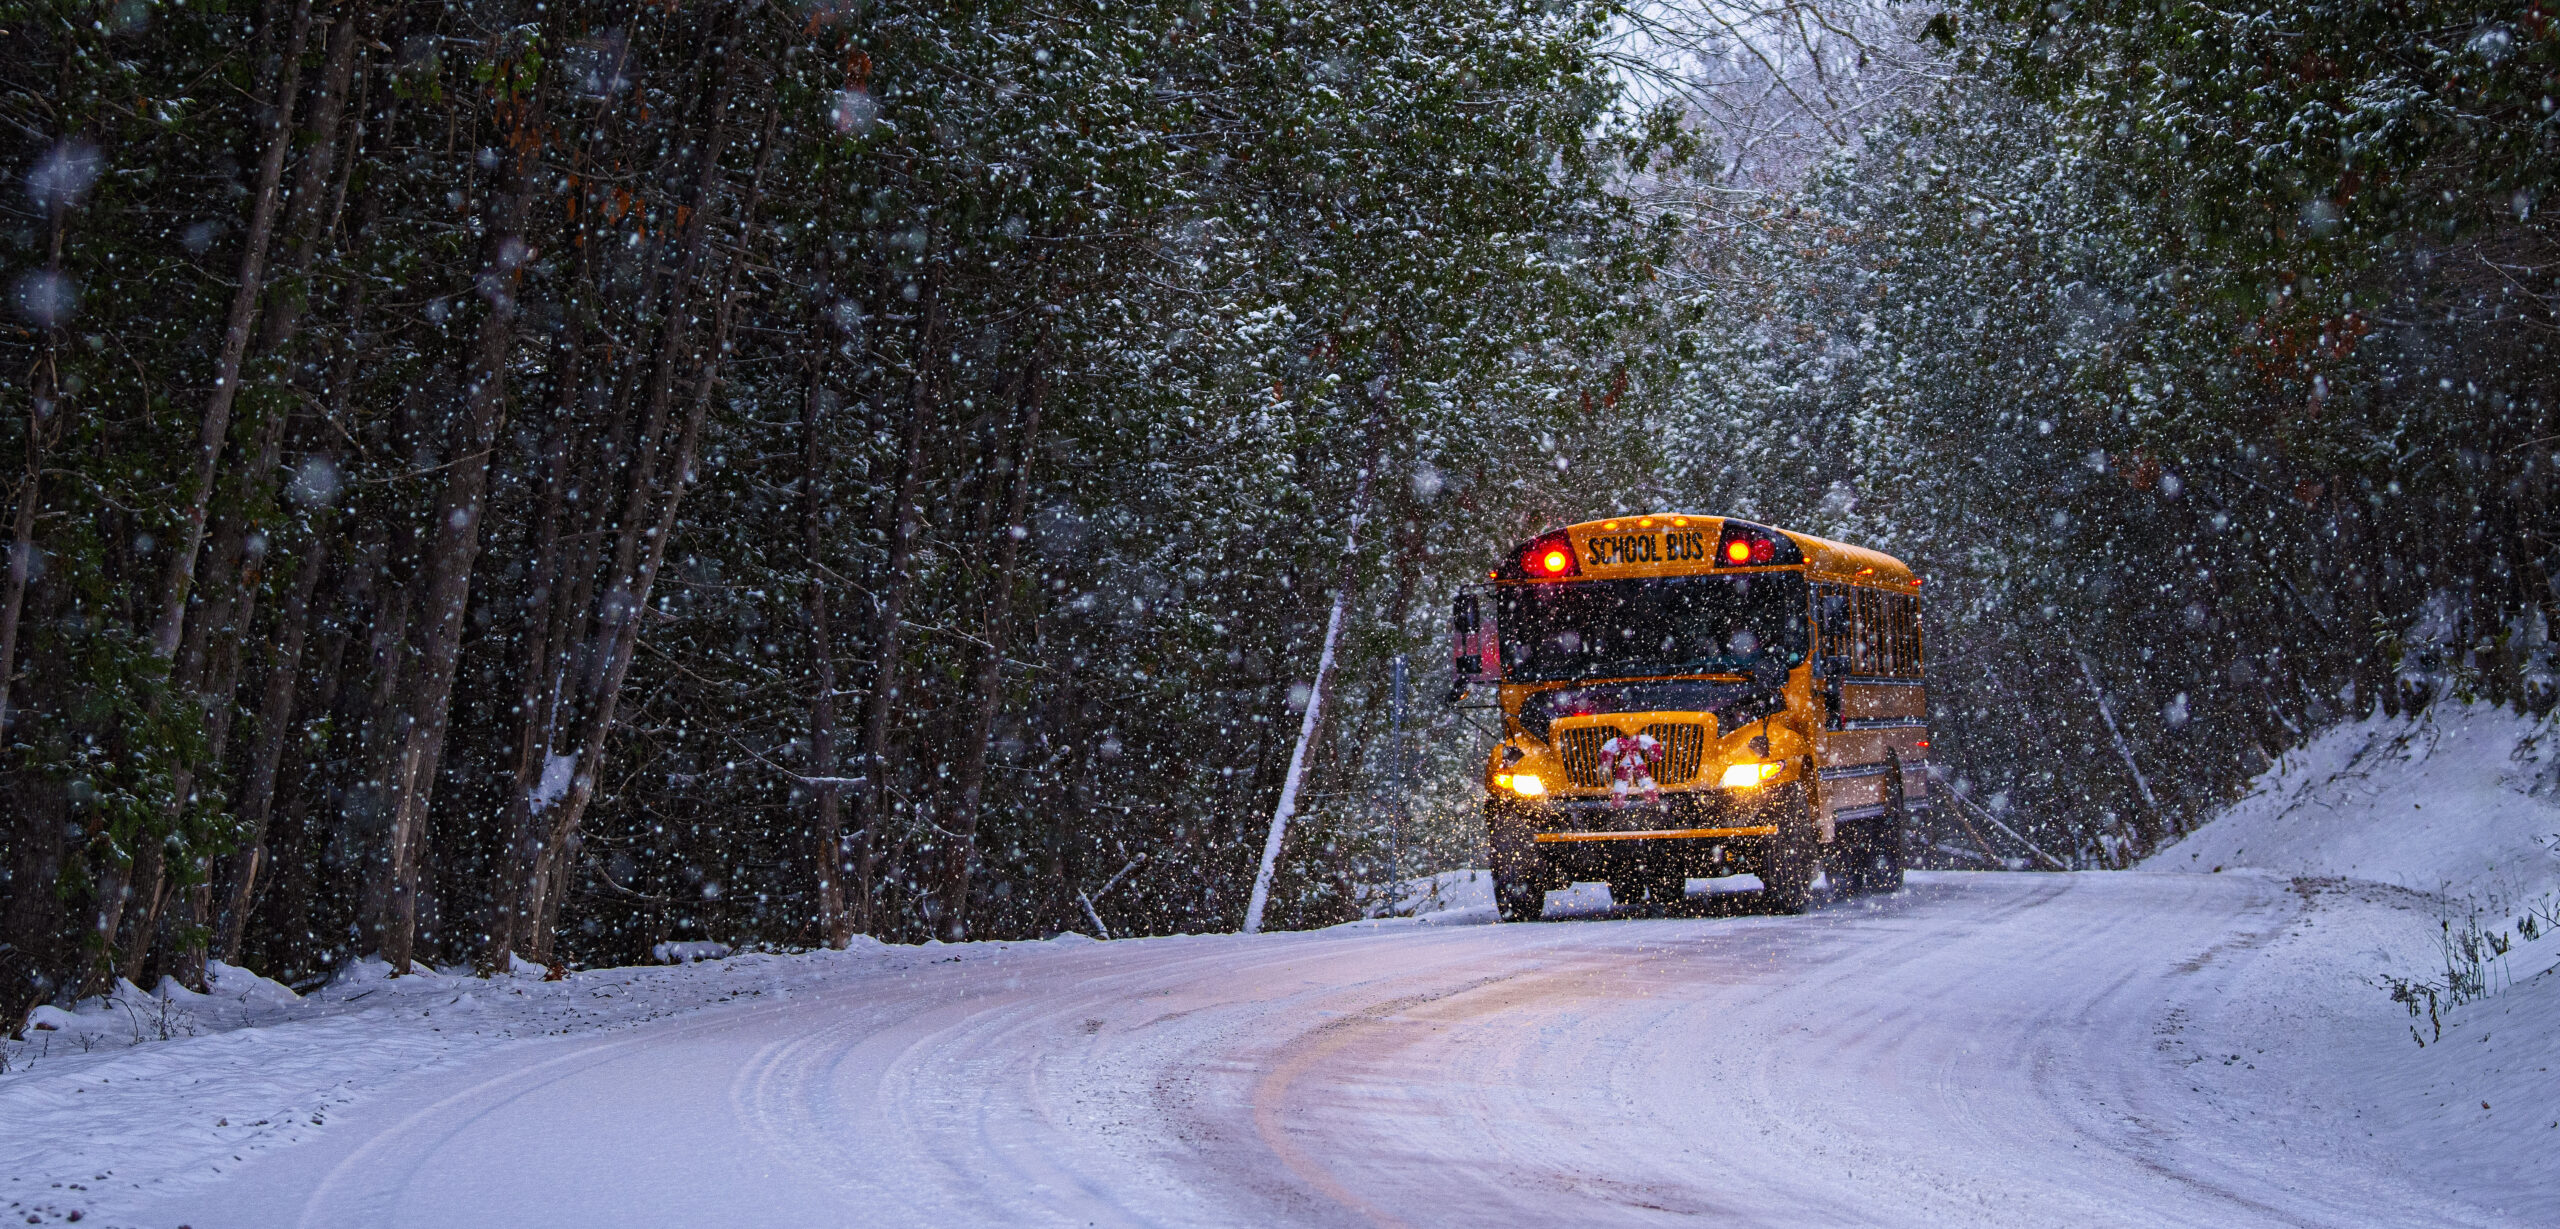 With Decree to Bus Drivers, School District Puts the 'Scrooge' in Christmas Spirit